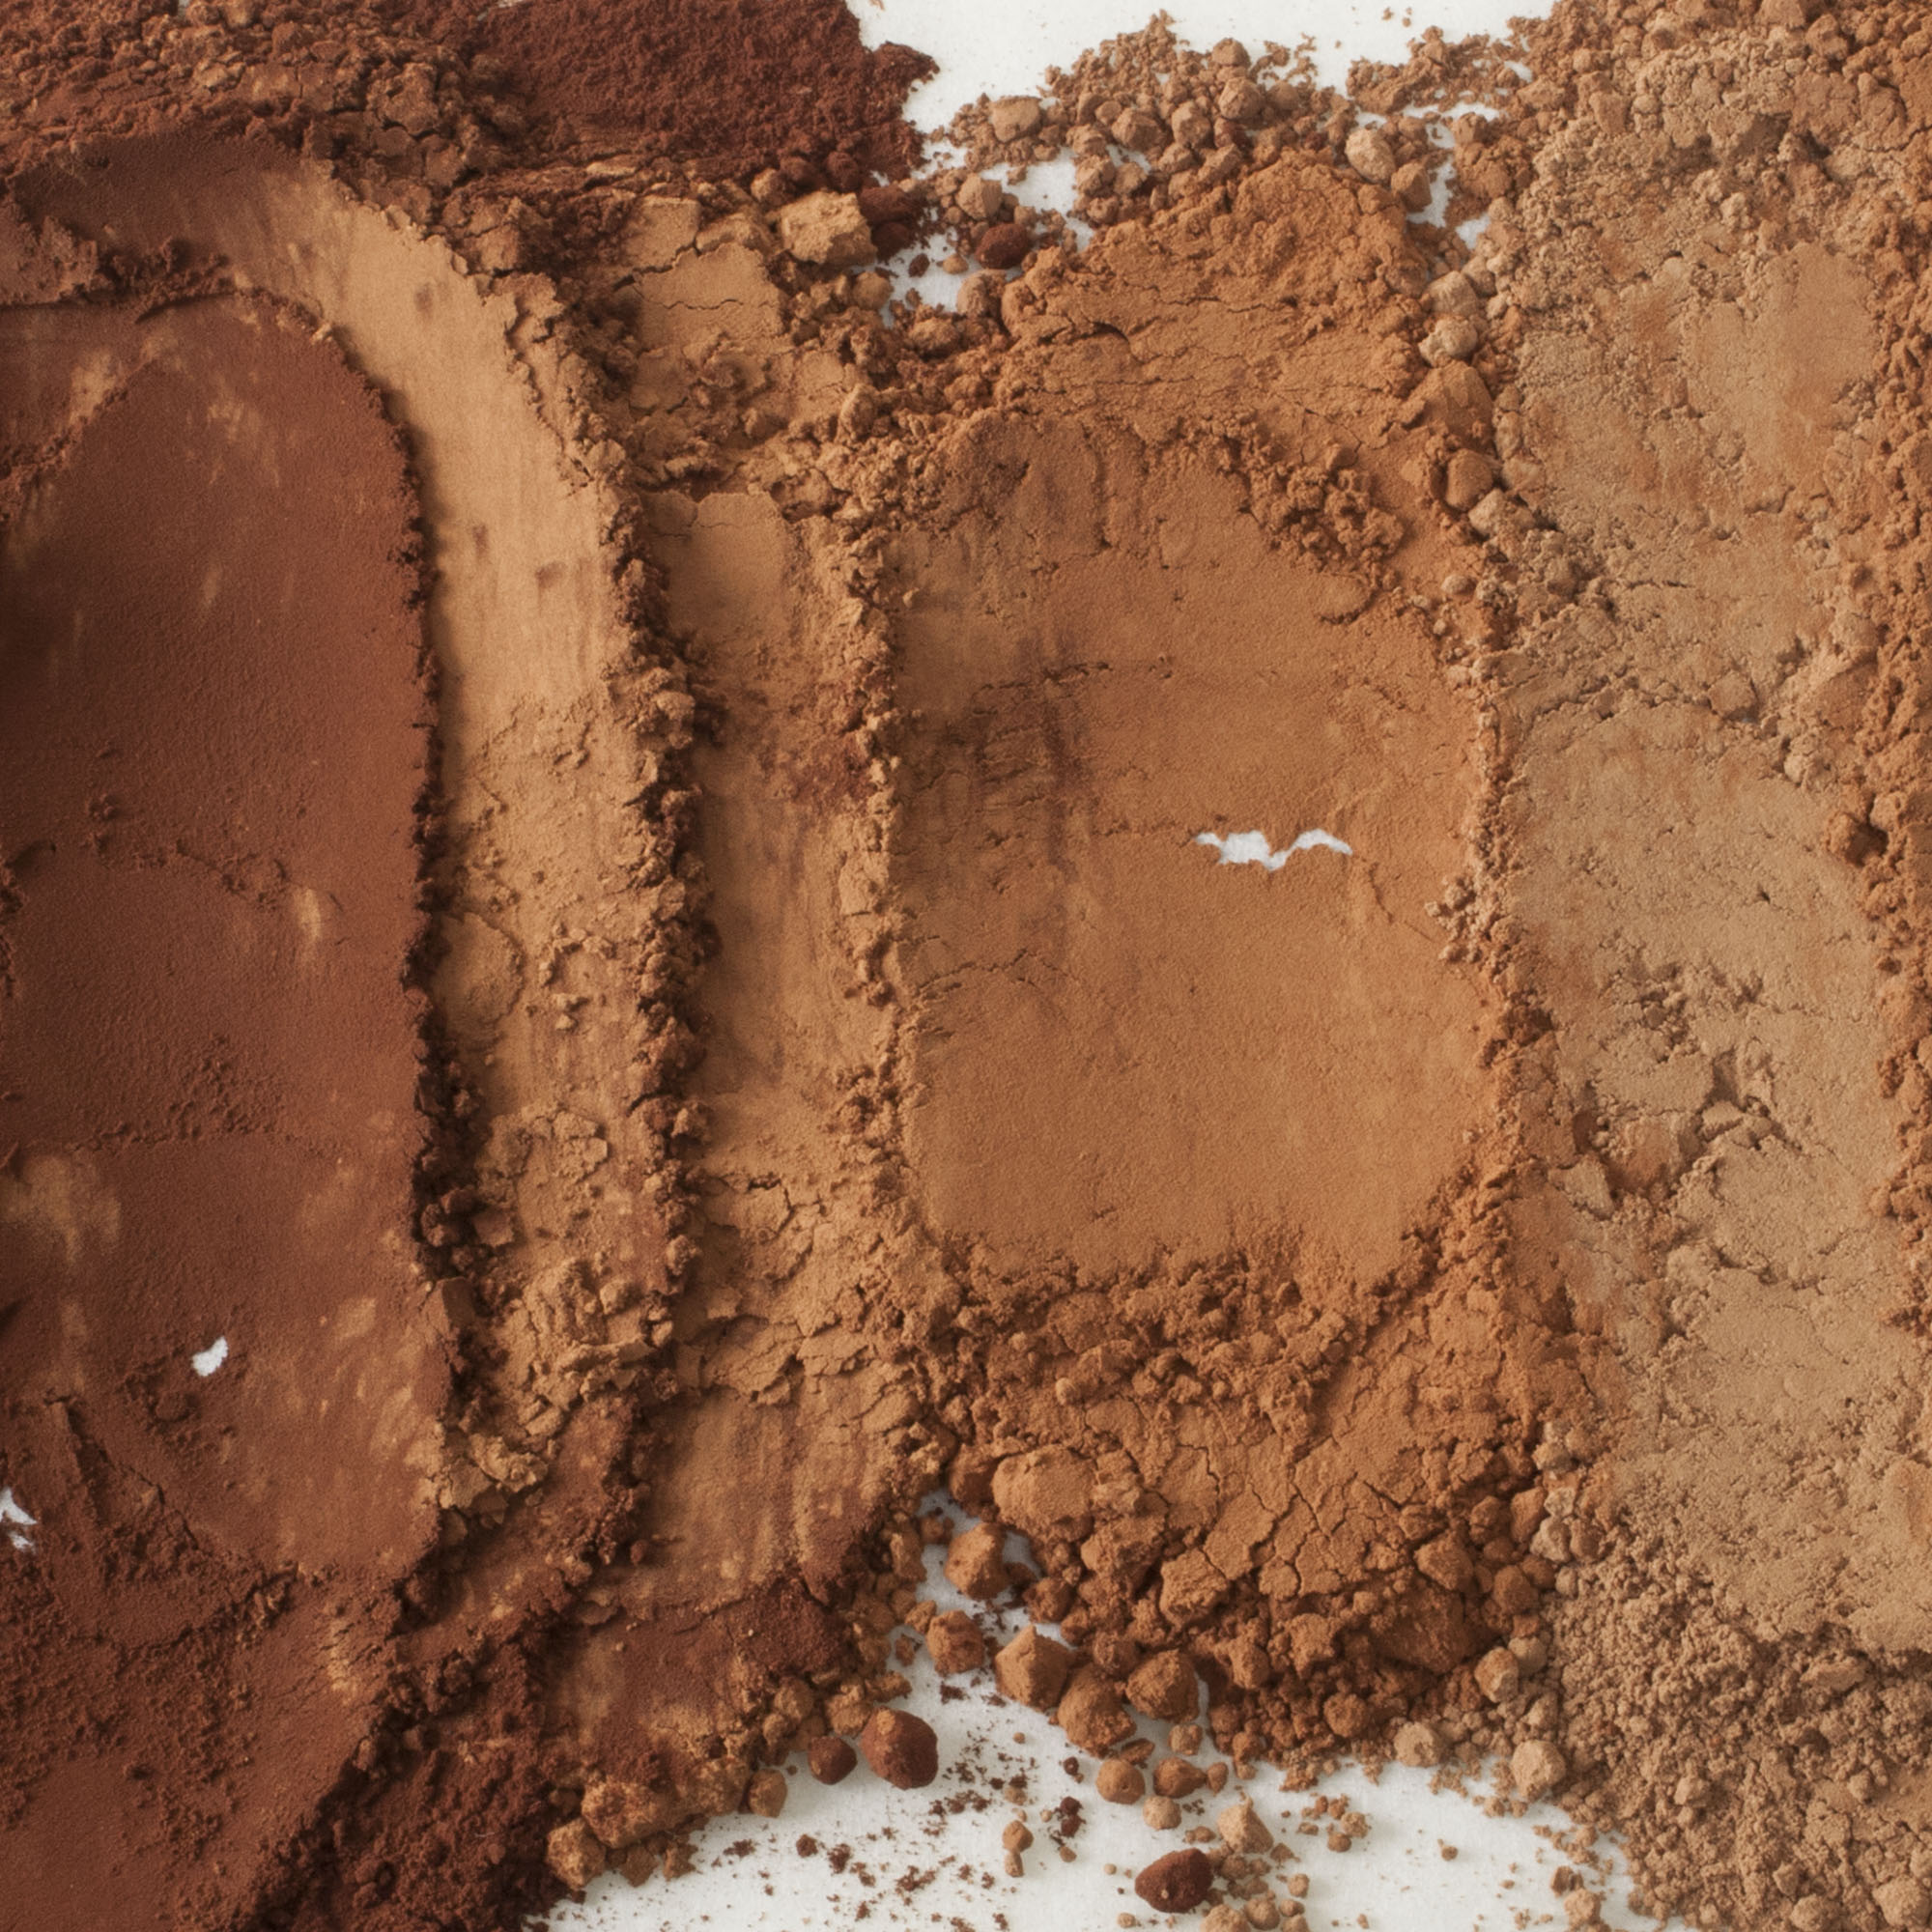 How to tell if cocoa powder has gone bad